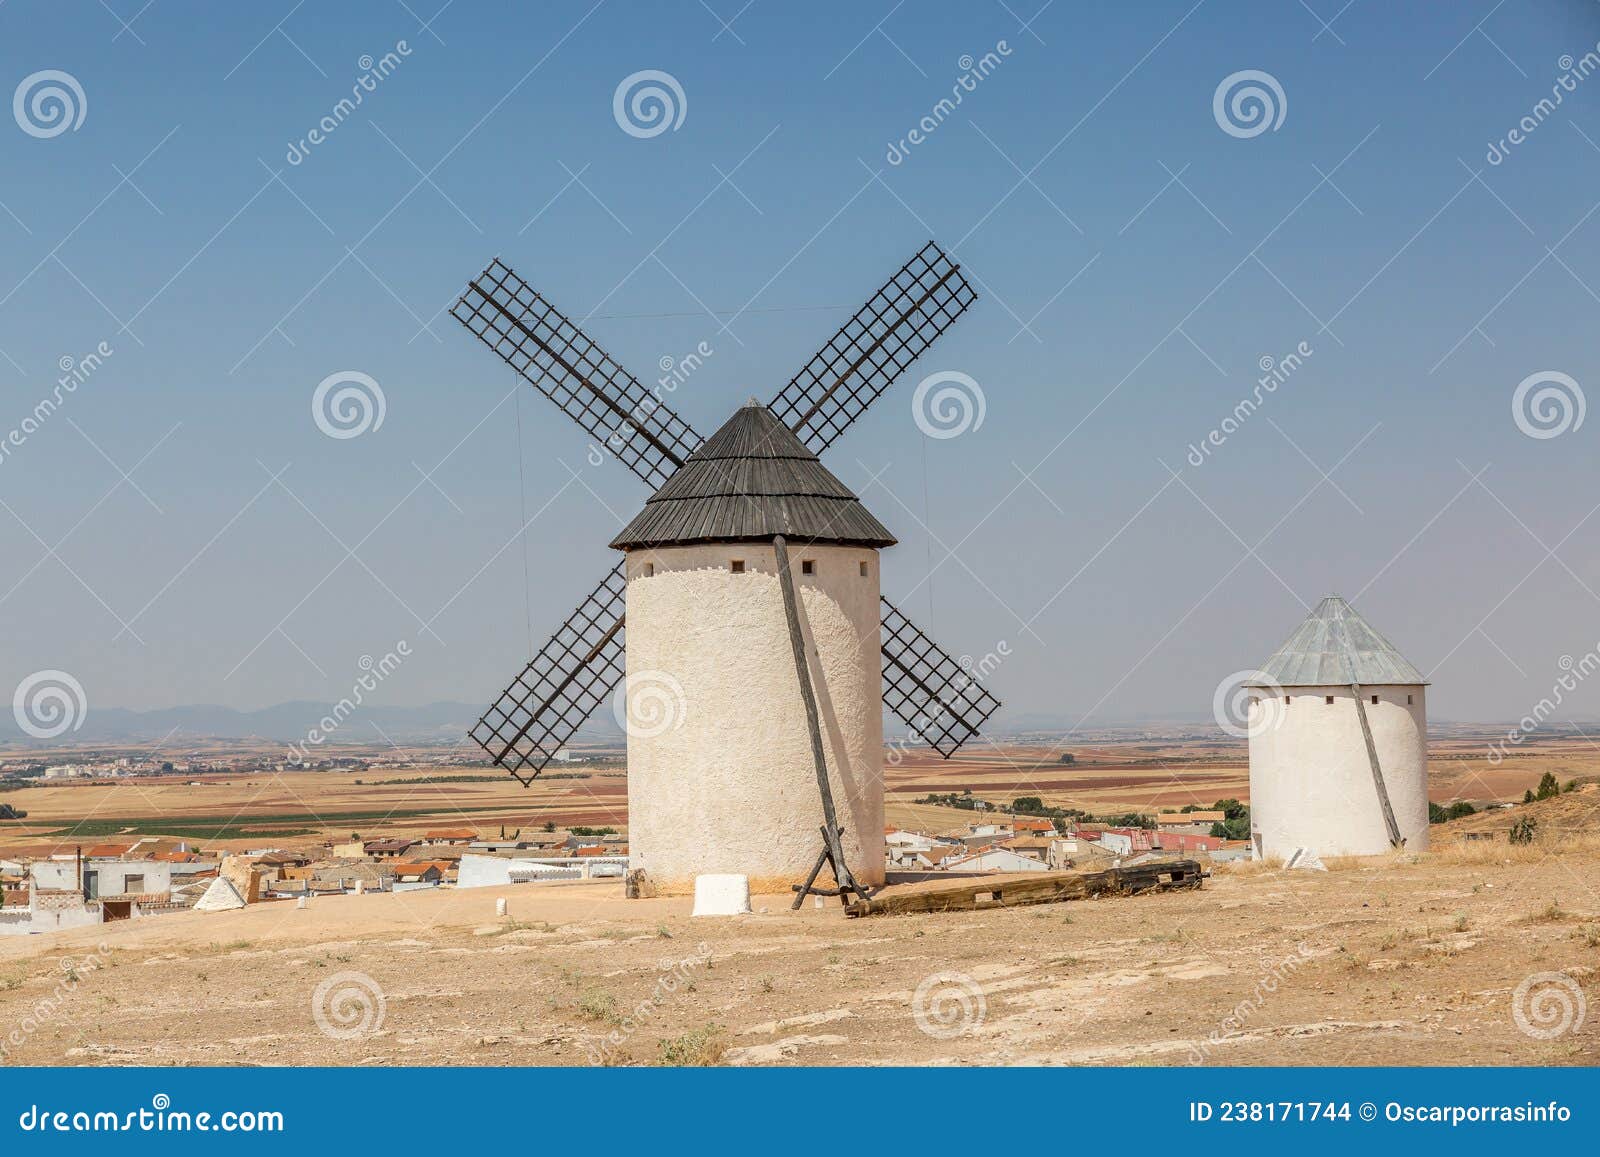 the most outstanding thing about campo de criptana are its windmills, an icon of castilla-la mancha